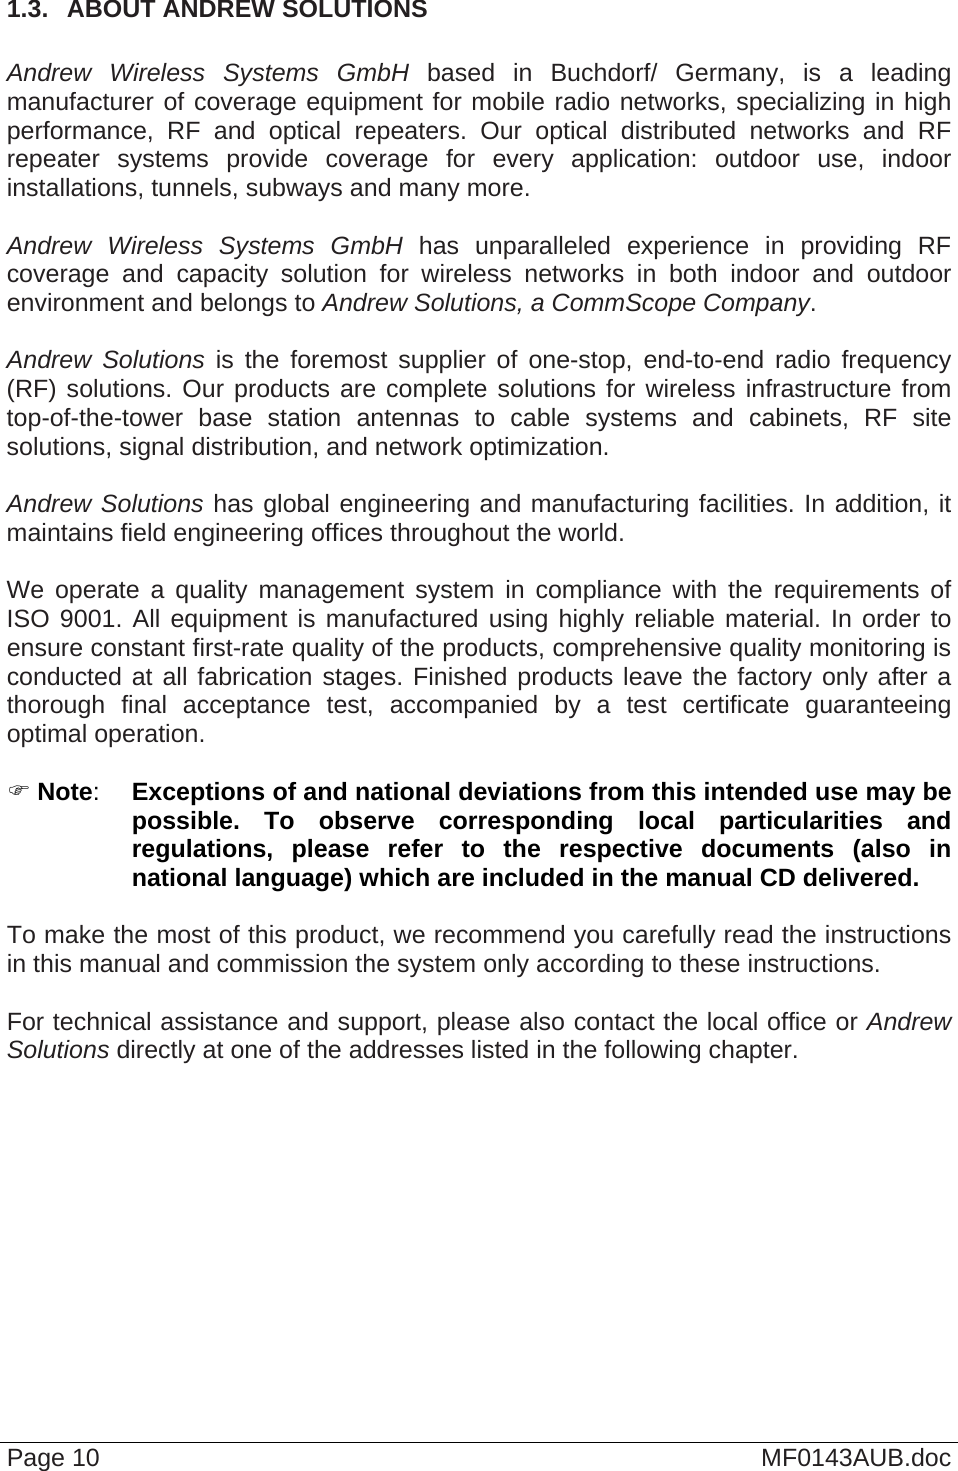  Page 10  MF0143AUB.doc 1.3.  ABOUT ANDREW SOLUTIONS  Andrew Wireless Systems GmbH based in Buchdorf/ Germany, is a leading manufacturer of coverage equipment for mobile radio networks, specializing in high performance, RF and optical repeaters. Our optical distributed networks and RF repeater systems provide coverage for every application: outdoor use, indoor installations, tunnels, subways and many more.  Andrew Wireless Systems GmbH has unparalleled experience in providing RF coverage and capacity solution for wireless networks in both indoor and outdoor environment and belongs to Andrew Solutions, a CommScope Company.  Andrew Solutions is the foremost supplier of one-stop, end-to-end radio frequency (RF) solutions. Our products are complete solutions for wireless infrastructure from top-of-the-tower base station antennas to cable systems and cabinets, RF site solutions, signal distribution, and network optimization.  Andrew Solutions has global engineering and manufacturing facilities. In addition, it maintains field engineering offices throughout the world.  We operate a quality management system in compliance with the requirements of ISO 9001. All equipment is manufactured using highly reliable material. In order to ensure constant first-rate quality of the products, comprehensive quality monitoring is conducted at all fabrication stages. Finished products leave the factory only after a thorough final acceptance test, accompanied by a test certificate guaranteeing optimal operation.   Note:  Exceptions of and national deviations from this intended use may be possible. To observe corresponding local particularities and regulations, please refer to the respective documents (also in national language) which are included in the manual CD delivered.  To make the most of this product, we recommend you carefully read the instructions in this manual and commission the system only according to these instructions.   For technical assistance and support, please also contact the local office or Andrew Solutions directly at one of the addresses listed in the following chapter.  